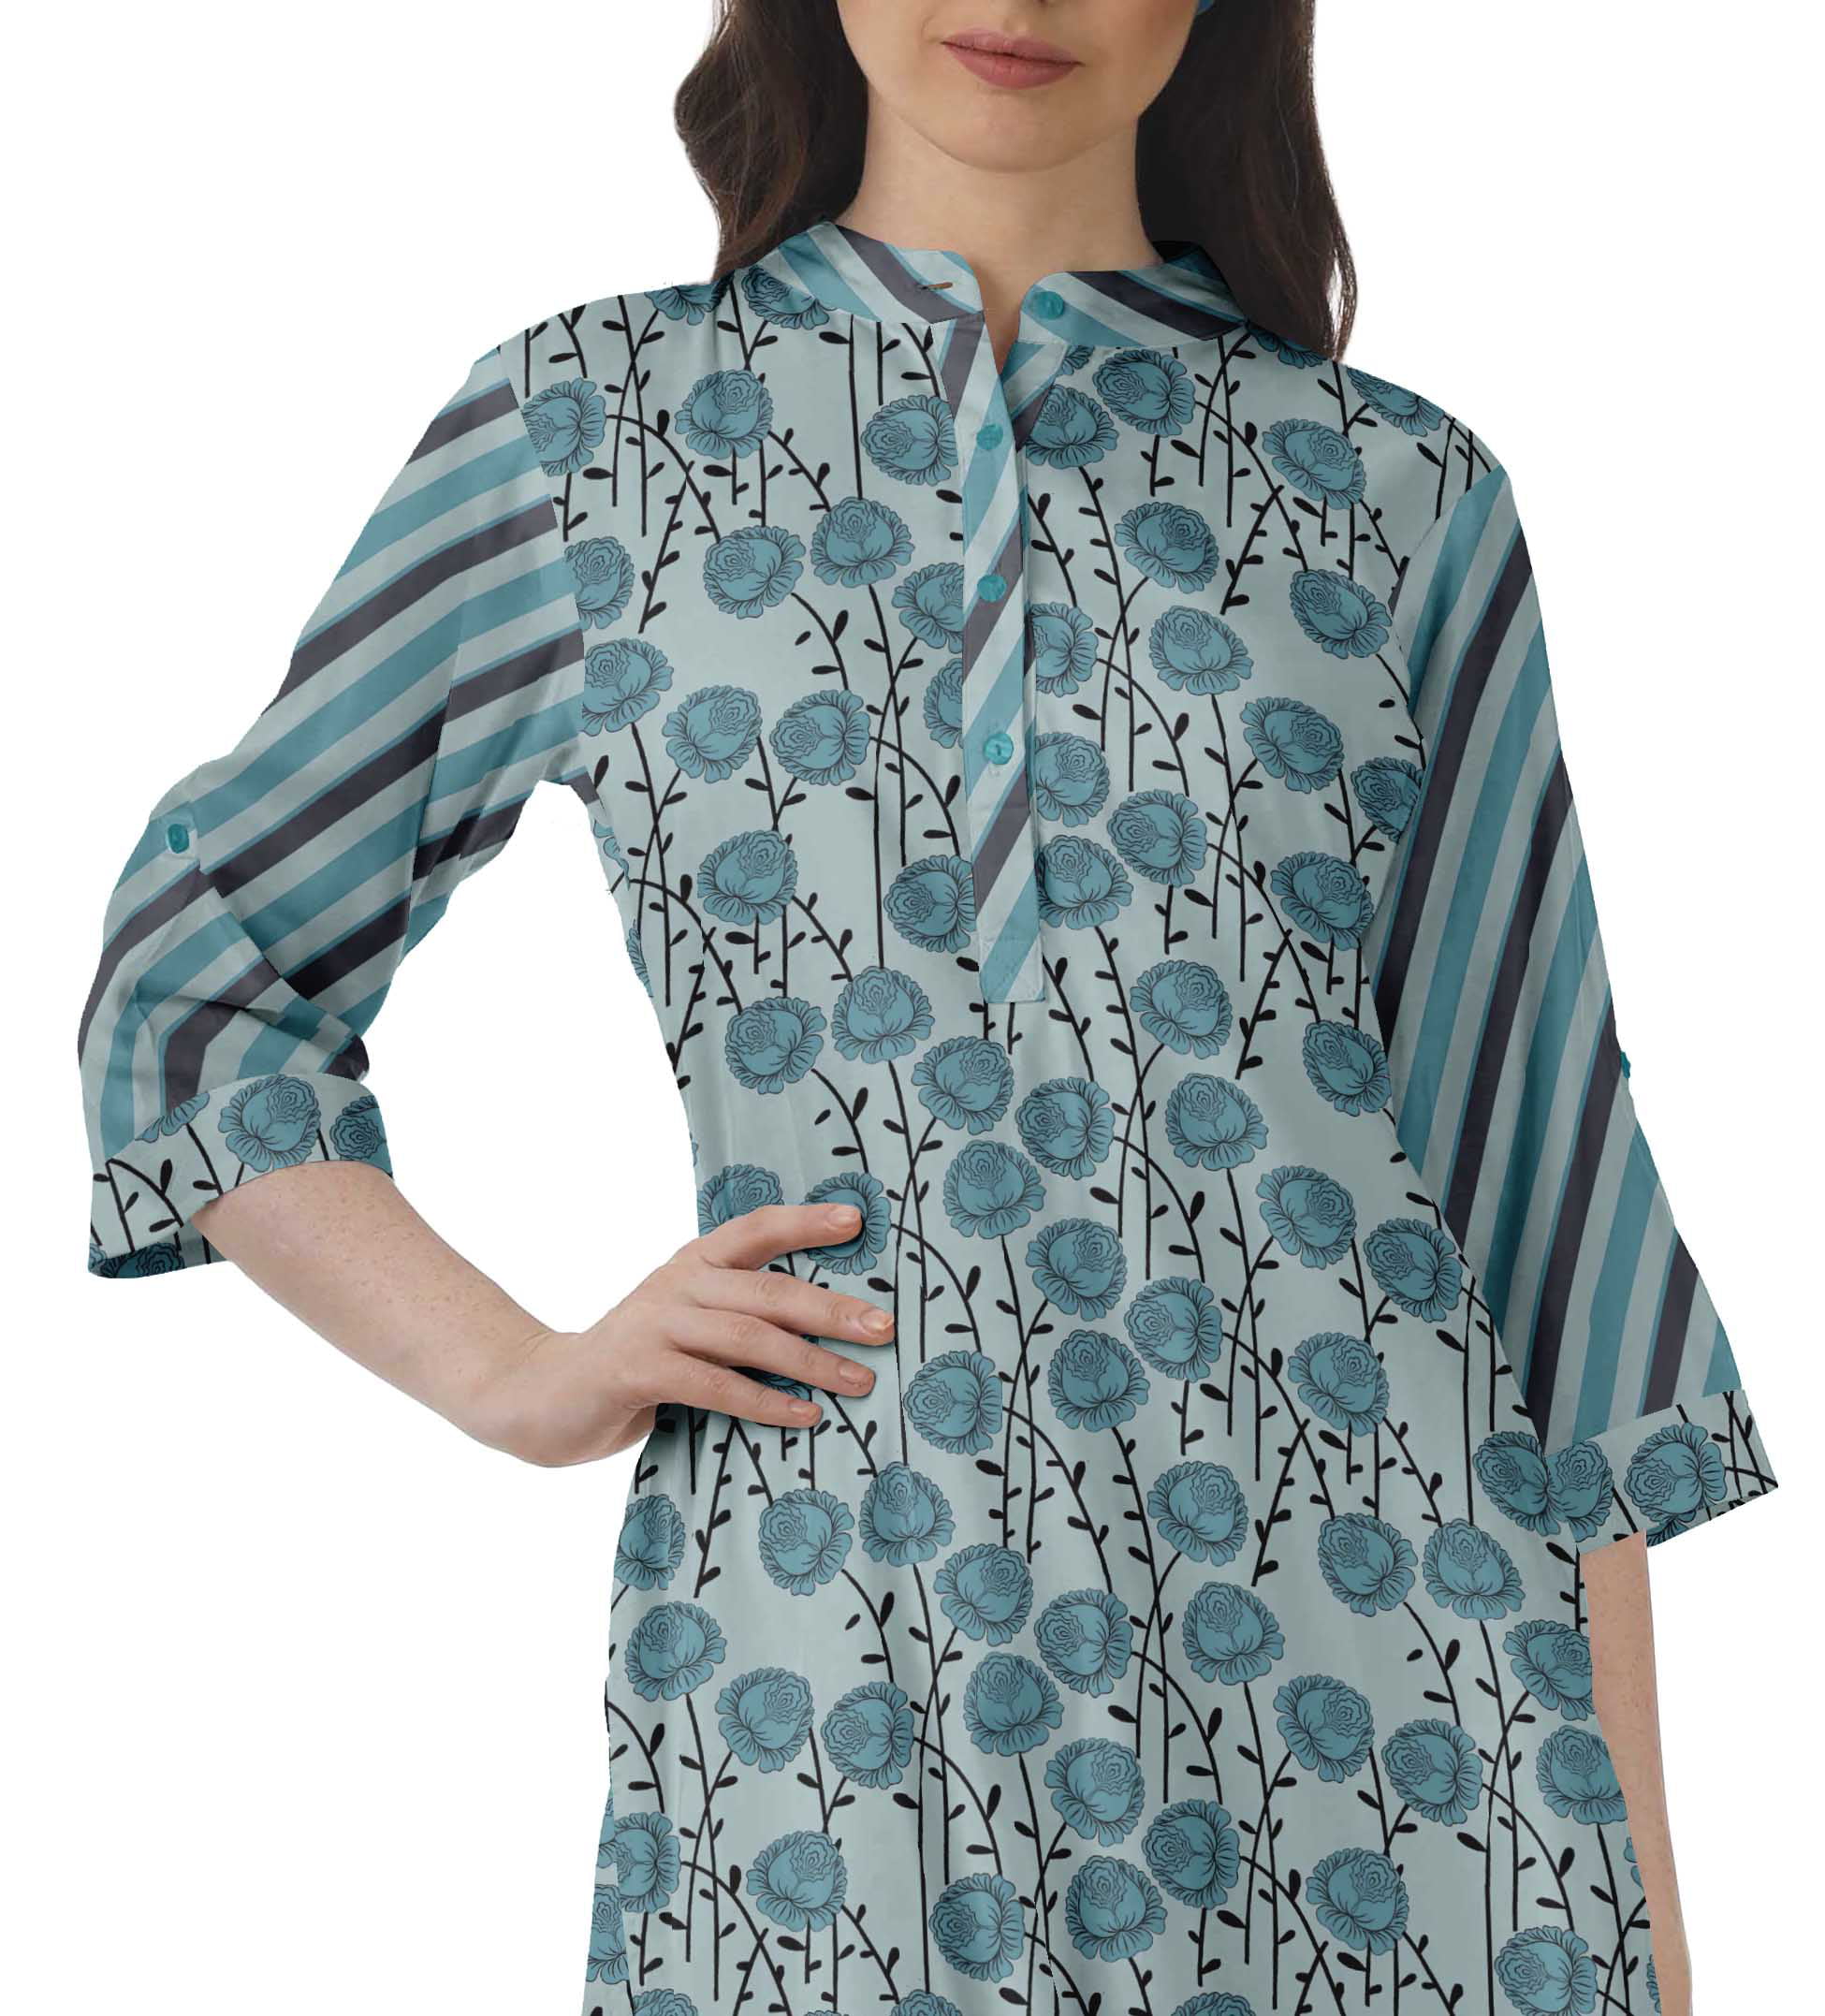 Buy House of Export Cotton Kurti for Women with Embroidery Work | Free Size  | Knee Length (Blue) at Amazon.in